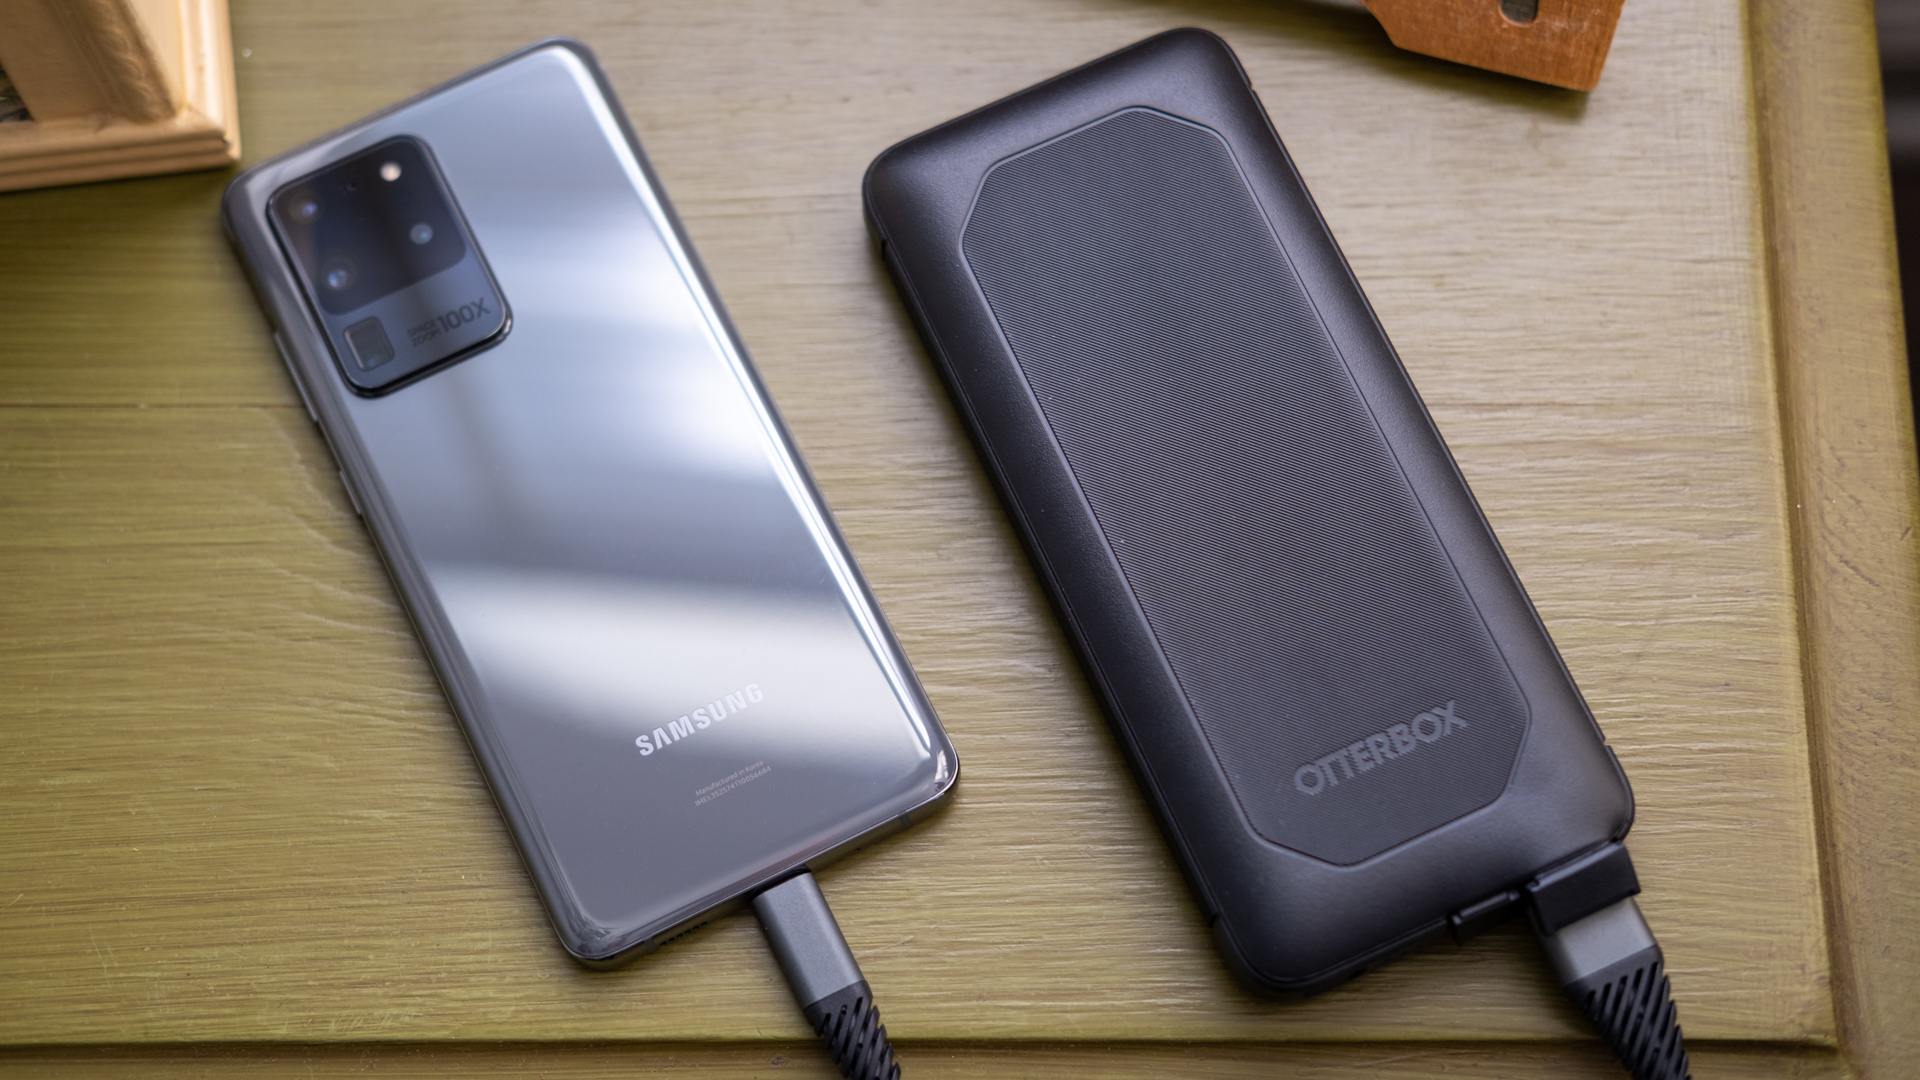 The Otterbox Wireless Power Pack charging the Samsung Galaxy S20 Ultra